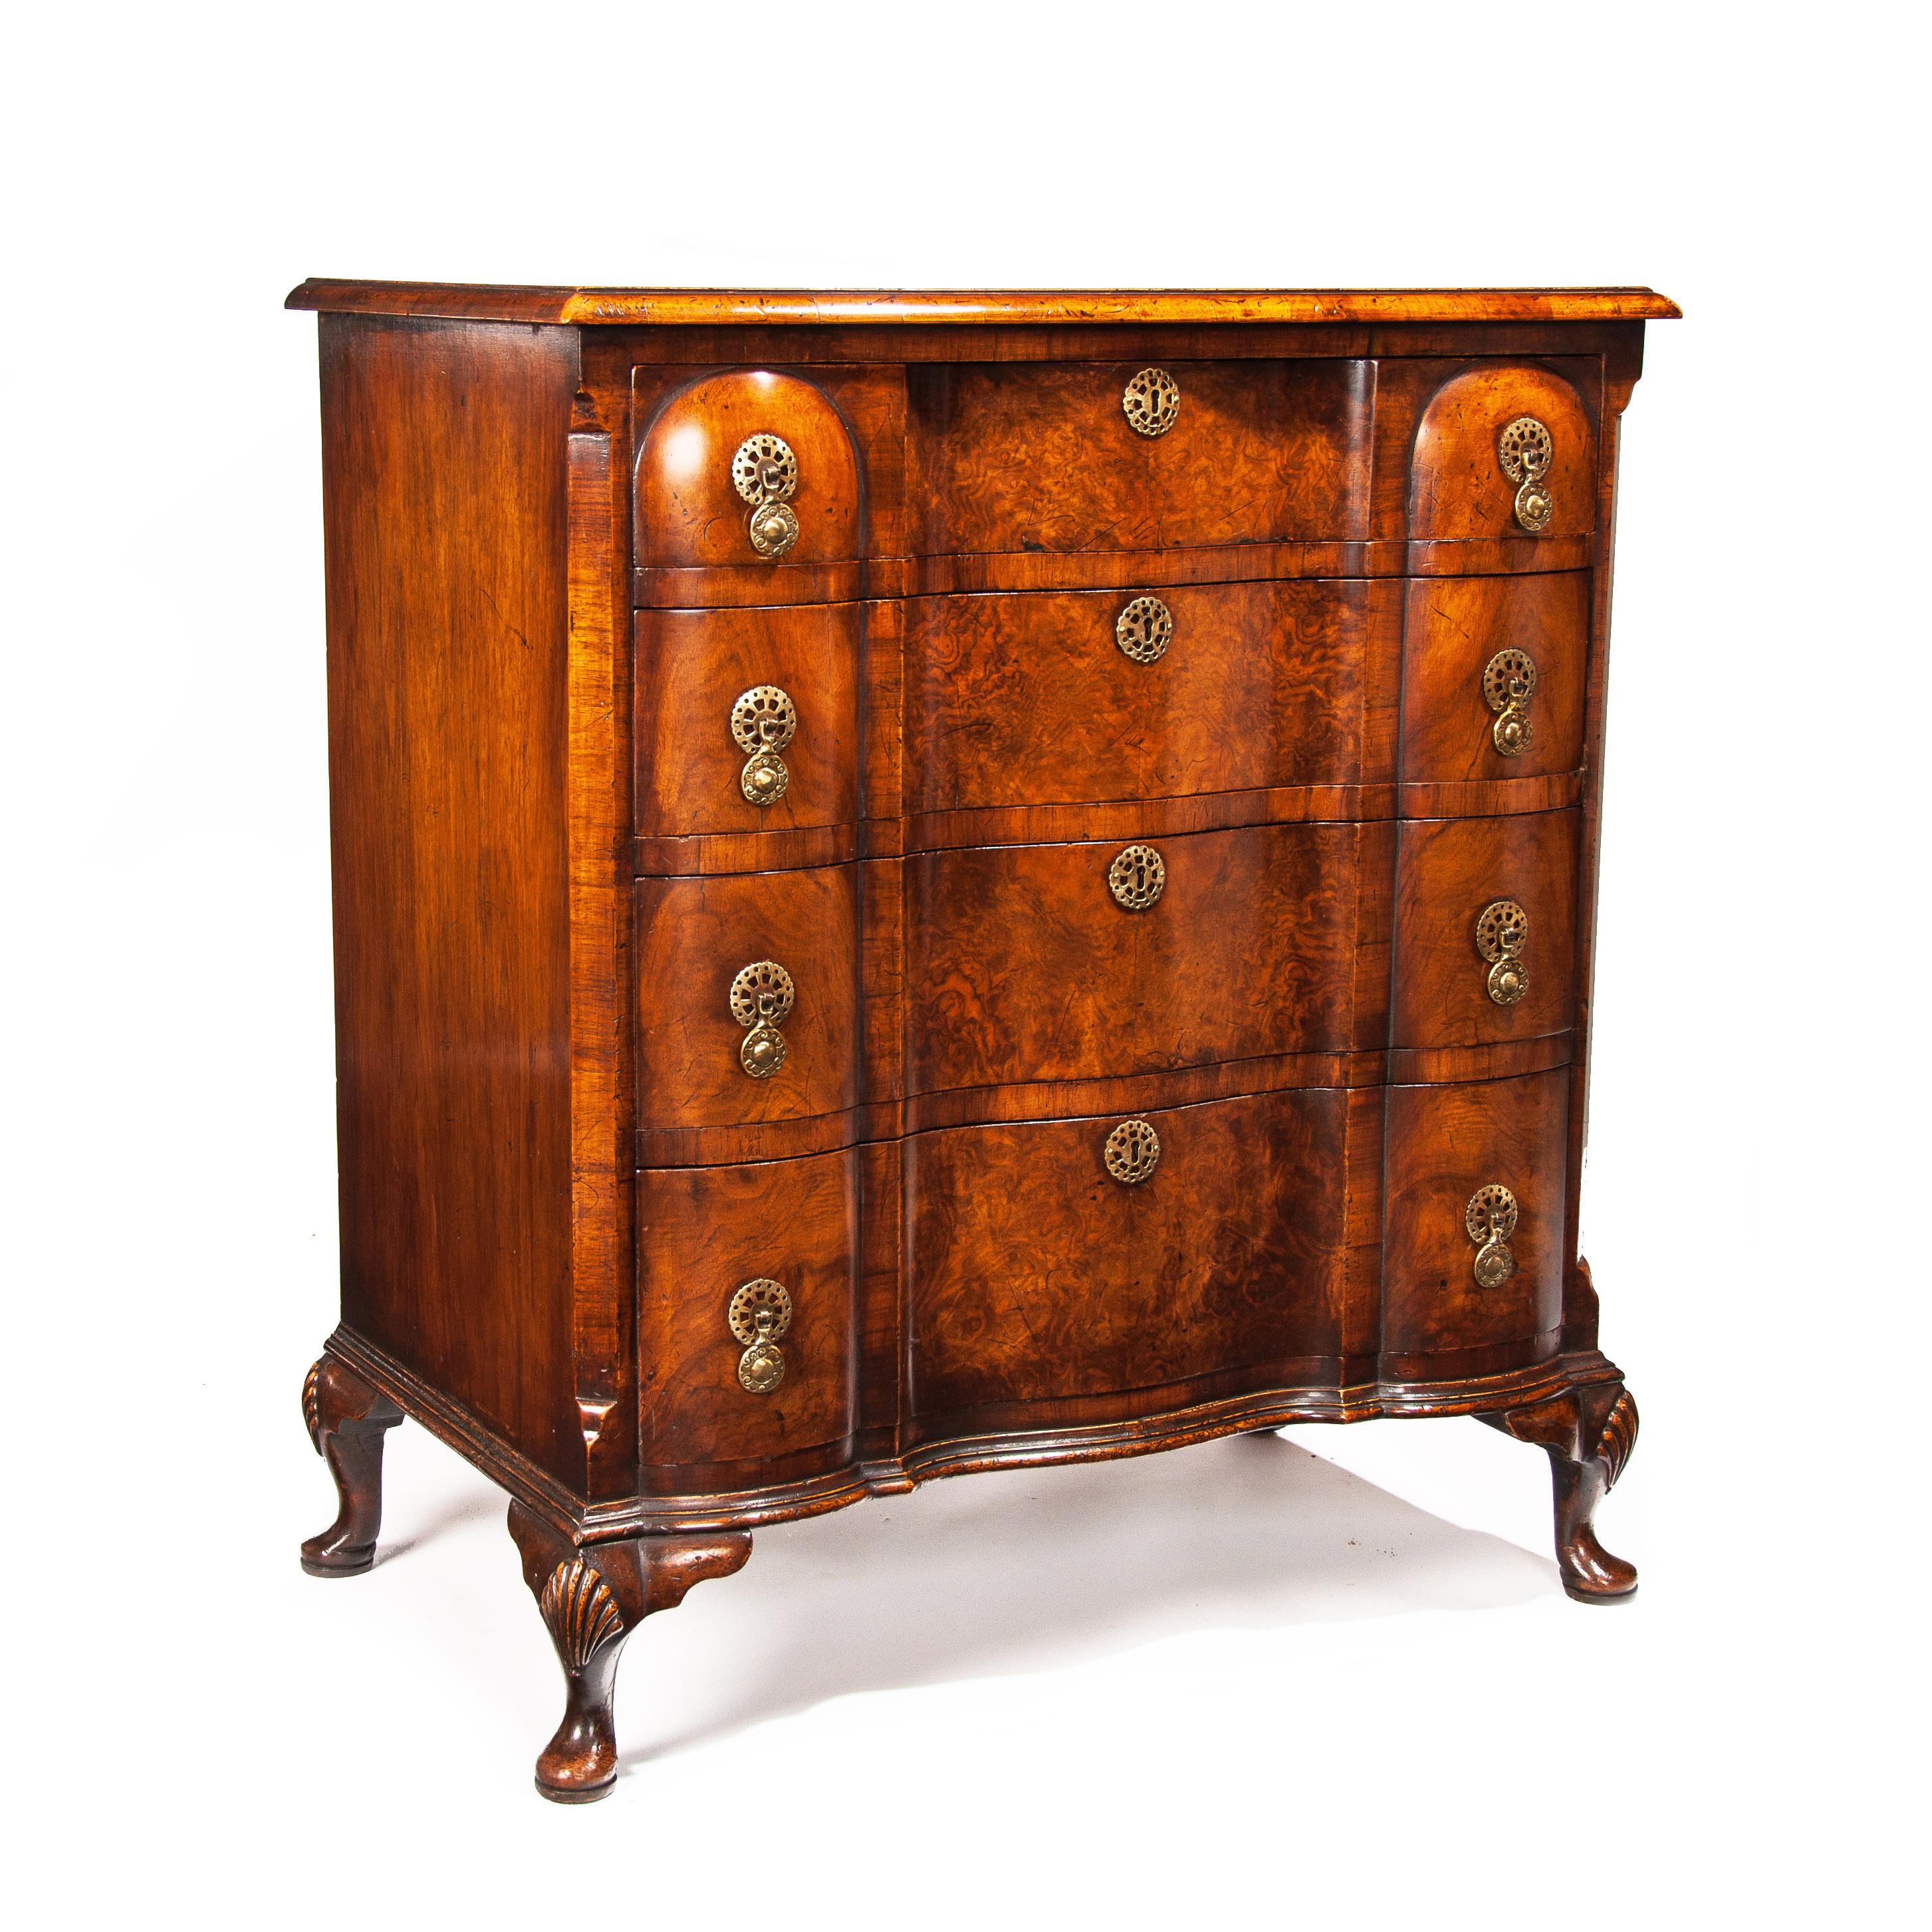 A superb quality antique shaped front walnut chest of drawers standing on cabriole feet, Queen Anne style.

English, circa 1900.


The construction of this chest of drawers has been closely matched to an 18th Century example with fine attention